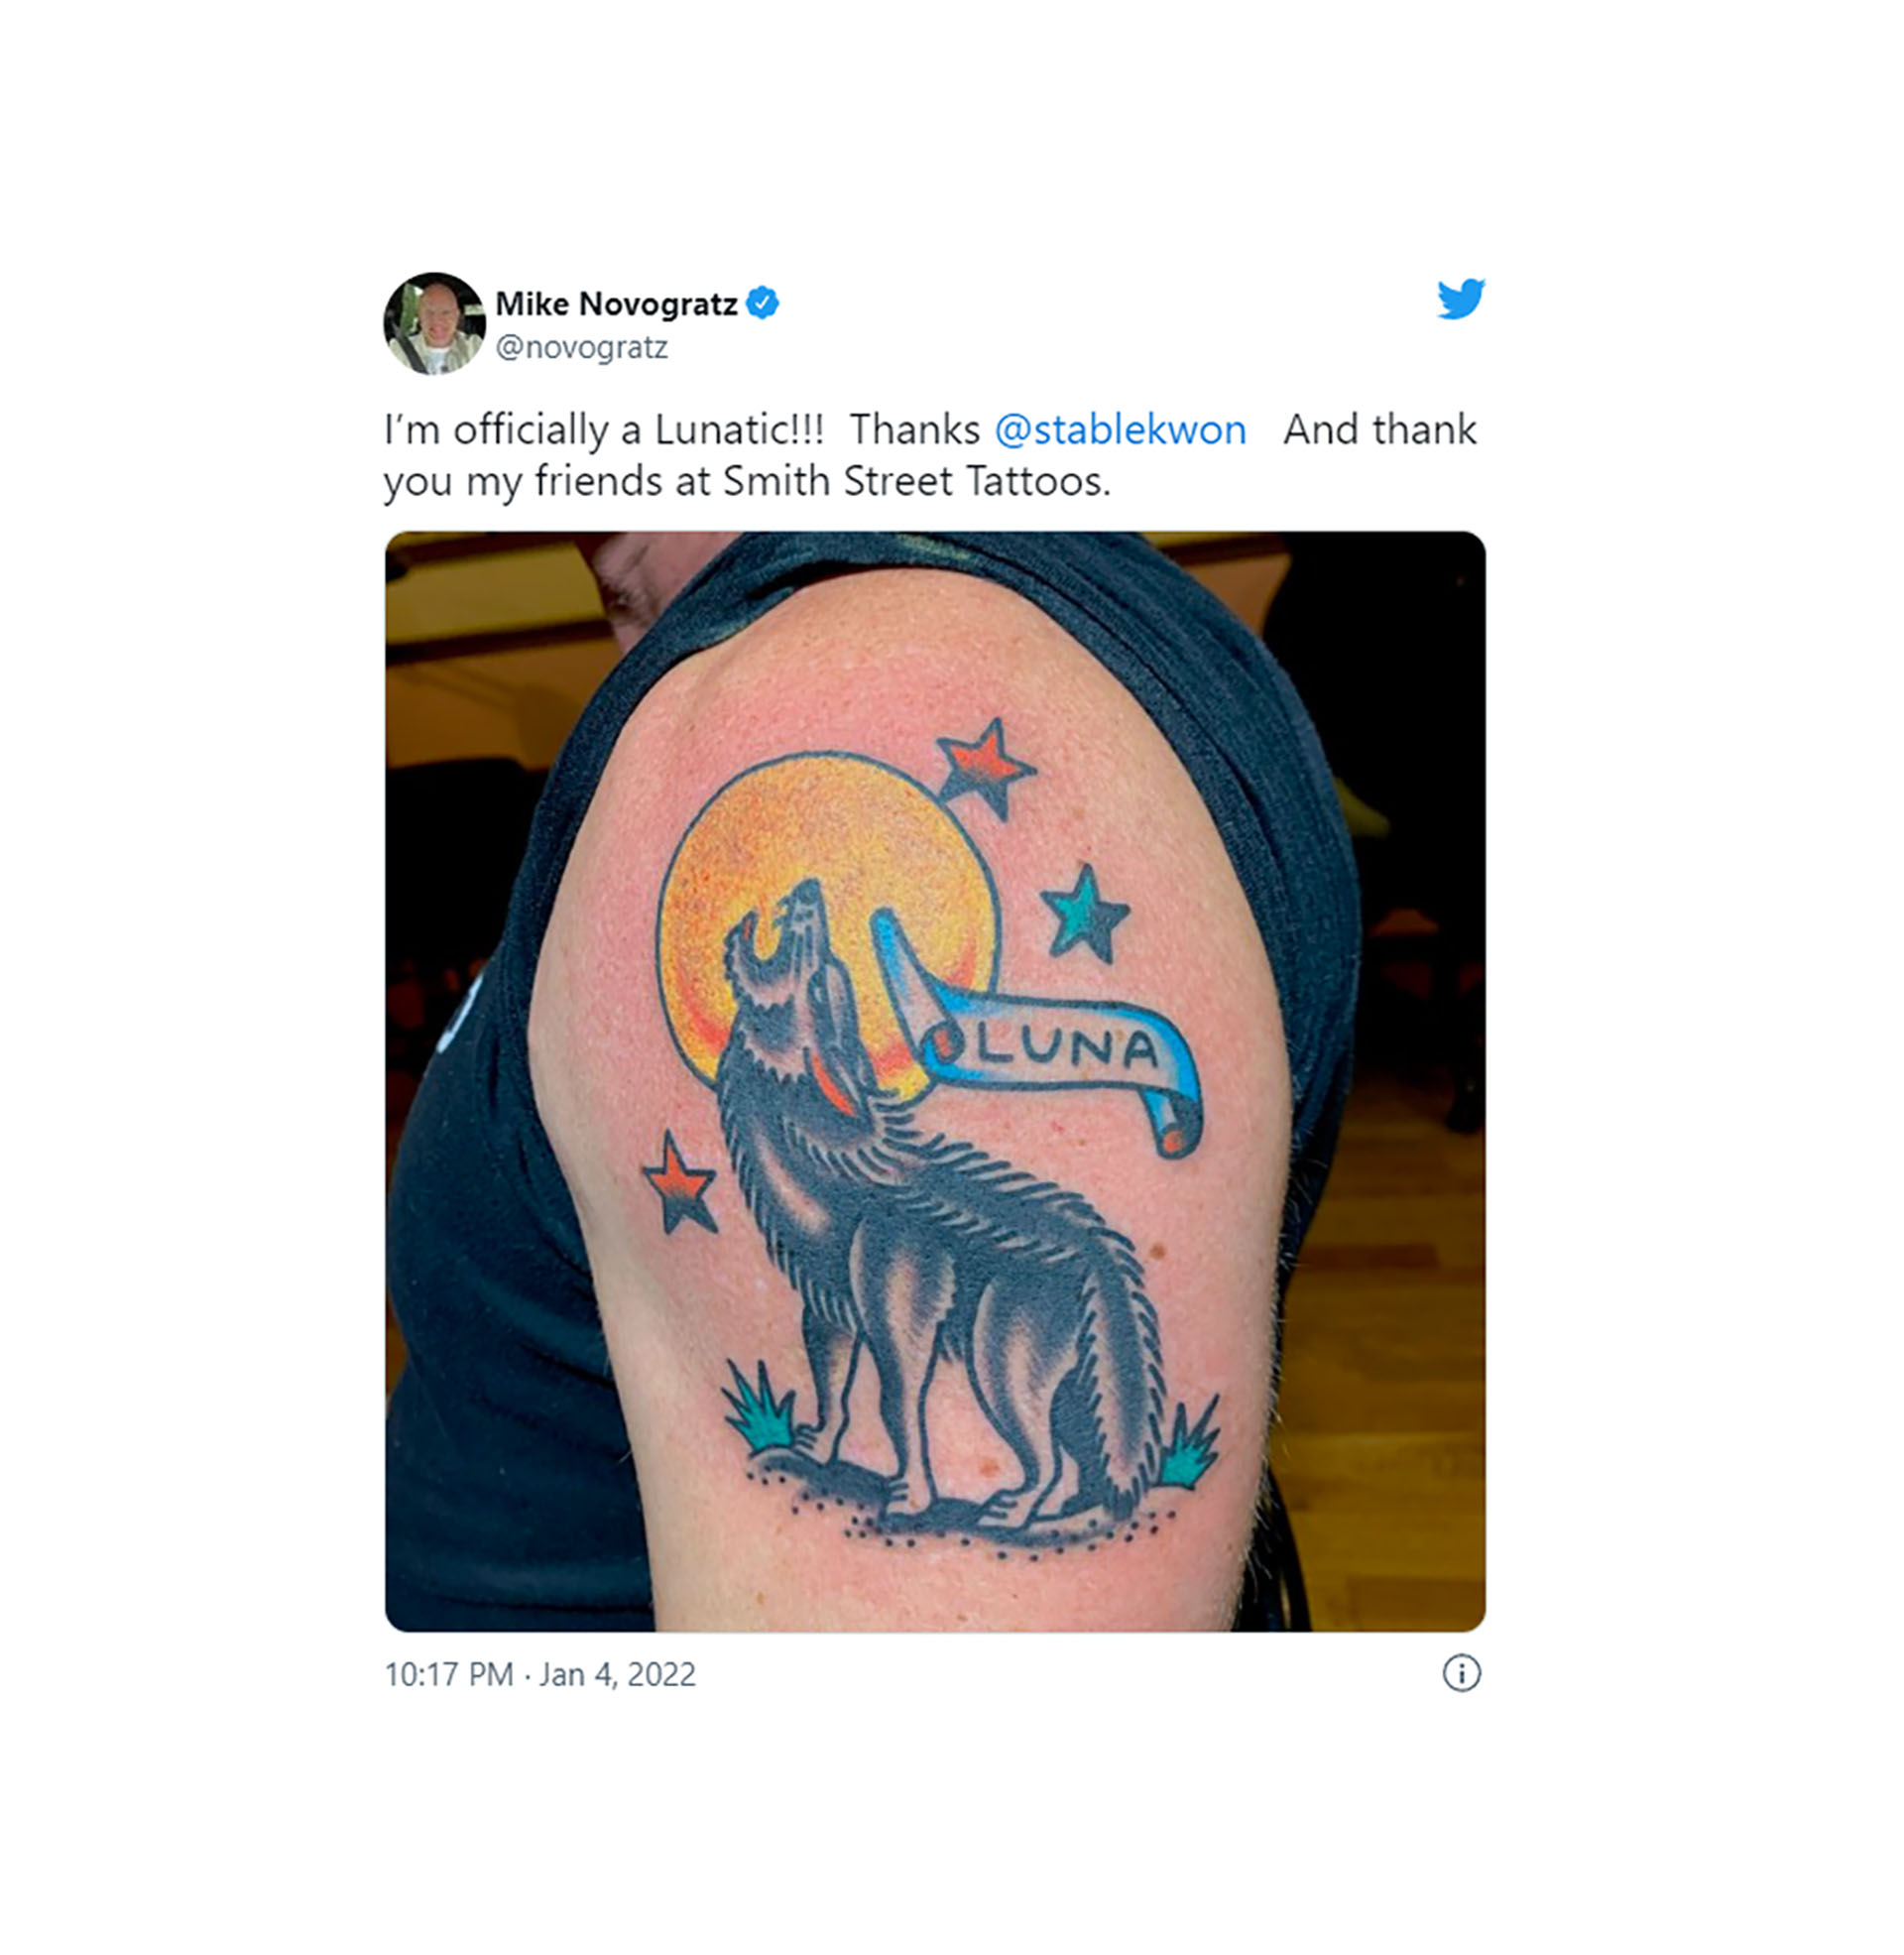 The tattoo of Novogratz, CEO of Galaxy Digital, a fund that aspires to be the "Goldman Sachs of cryptocurrencies"